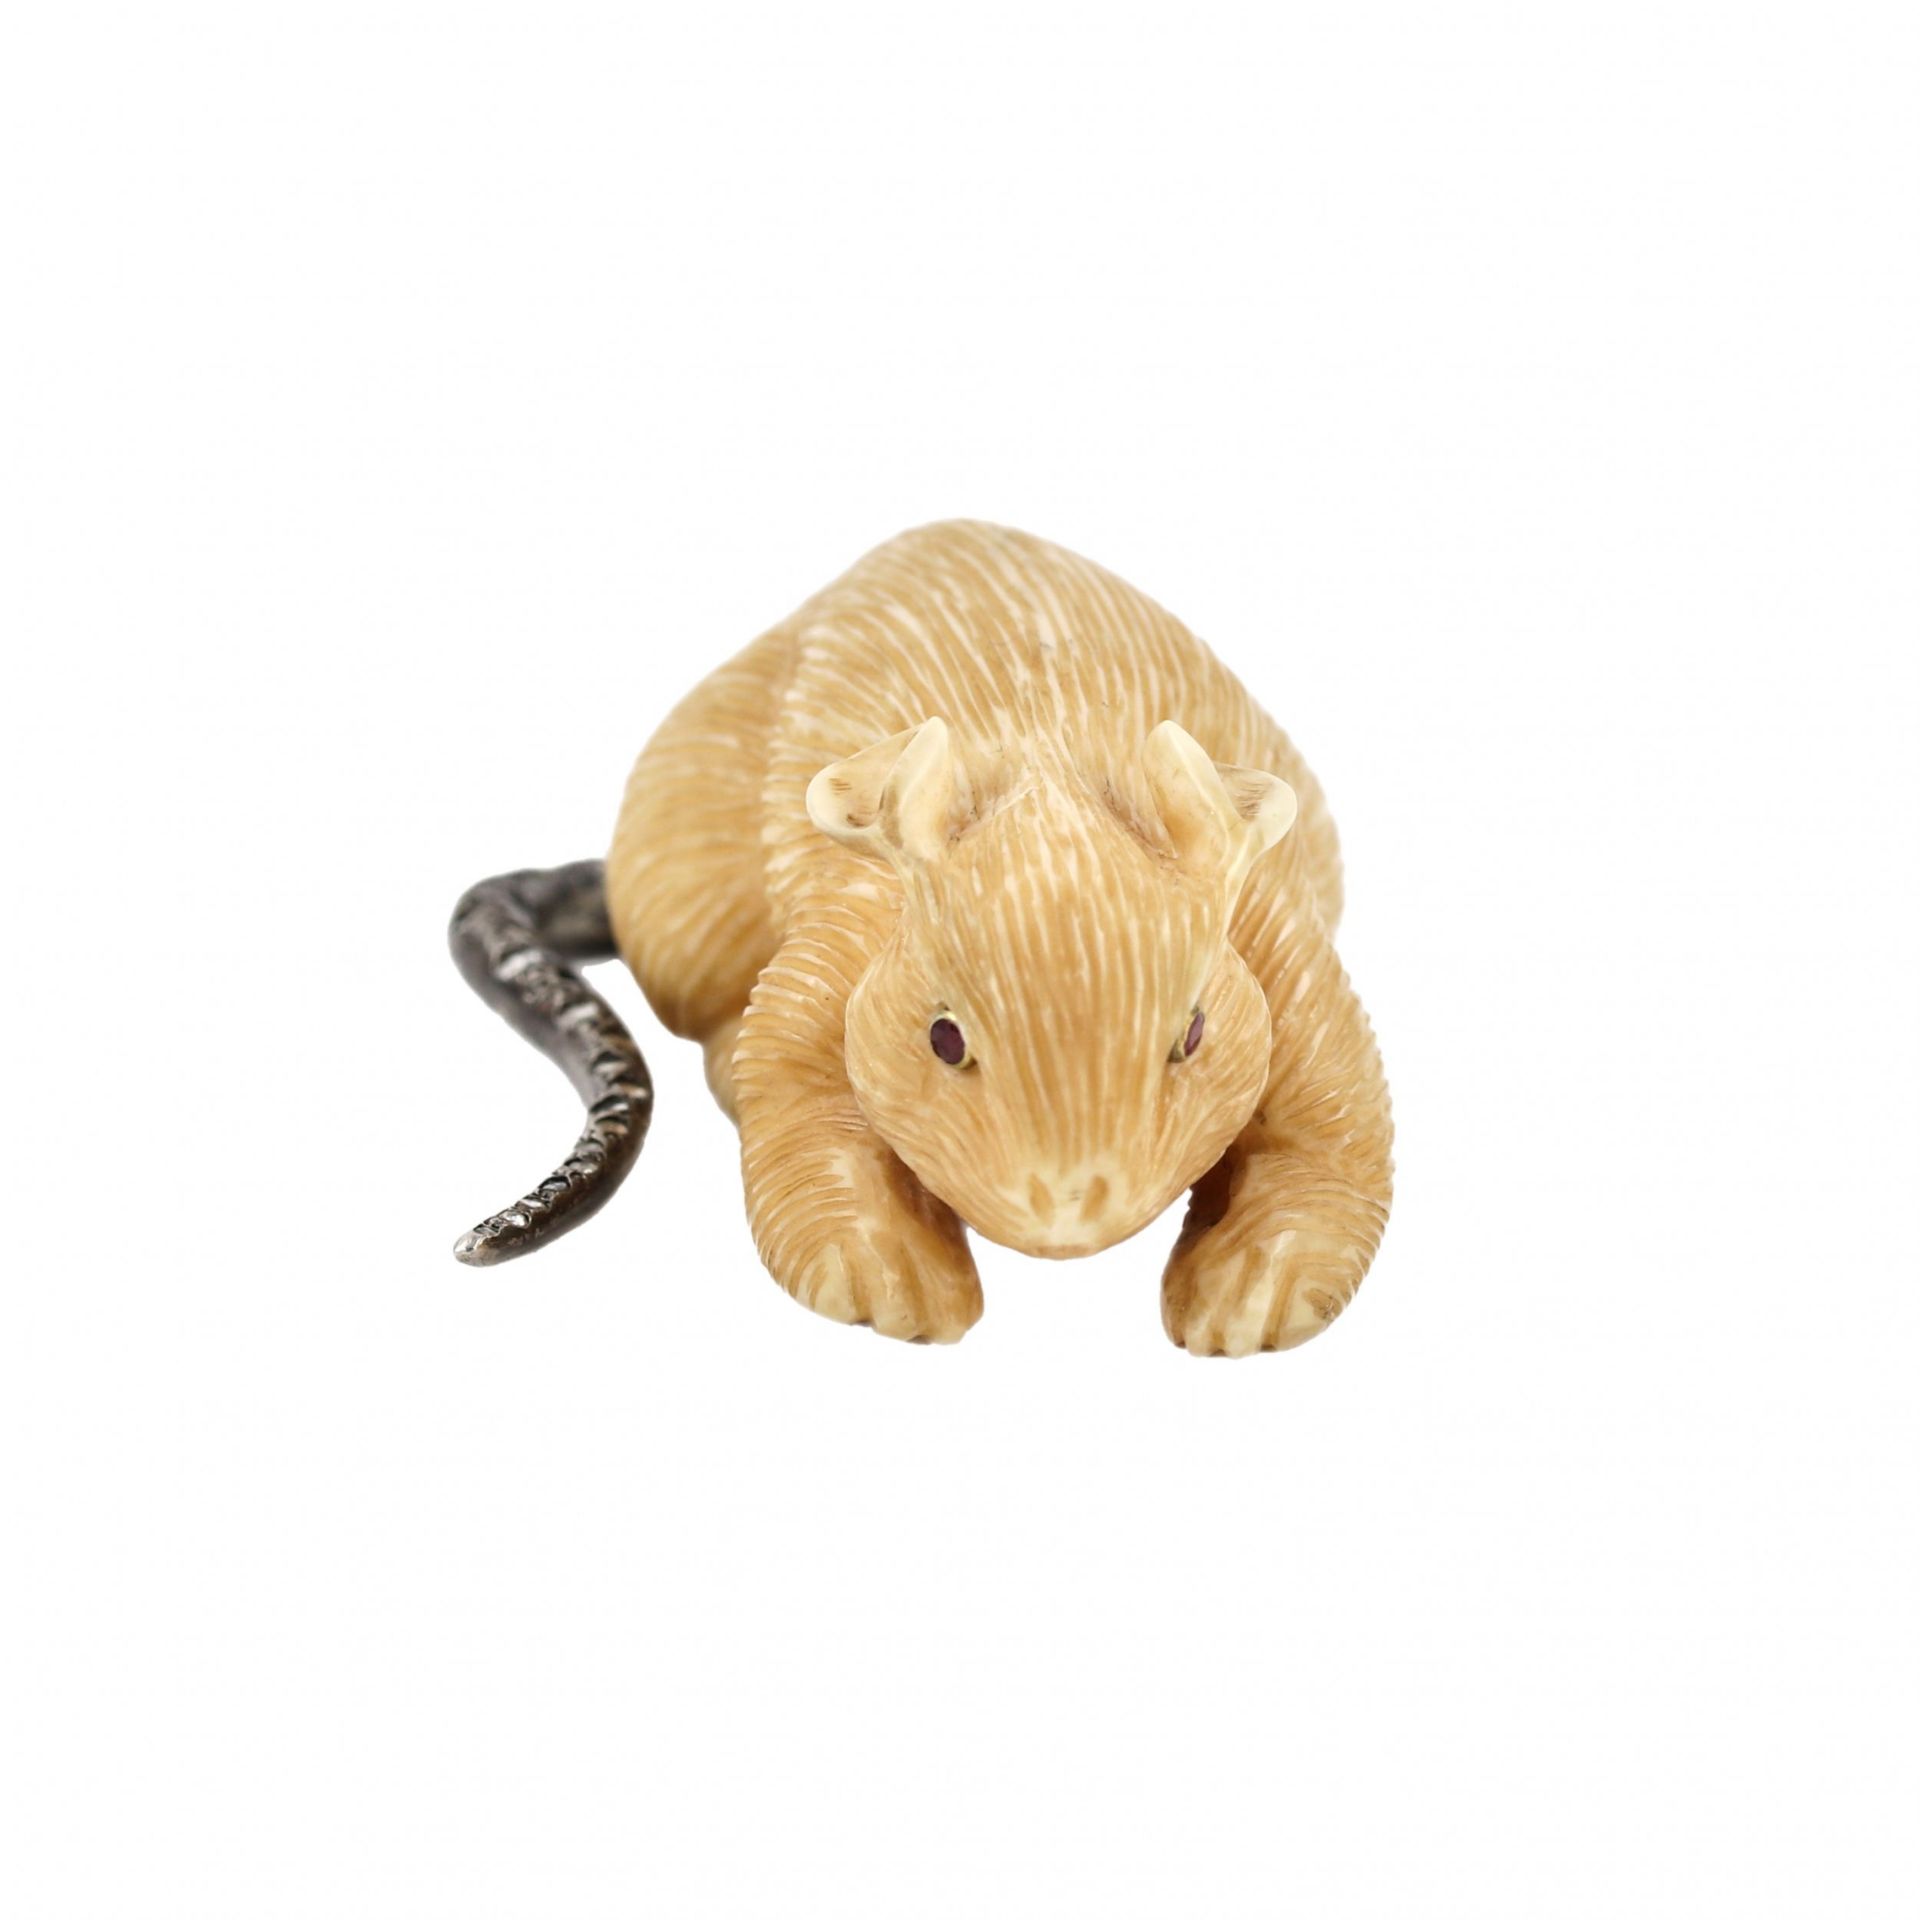 Carved mammoth tusk mouse with diamond tail. - Image 4 of 9